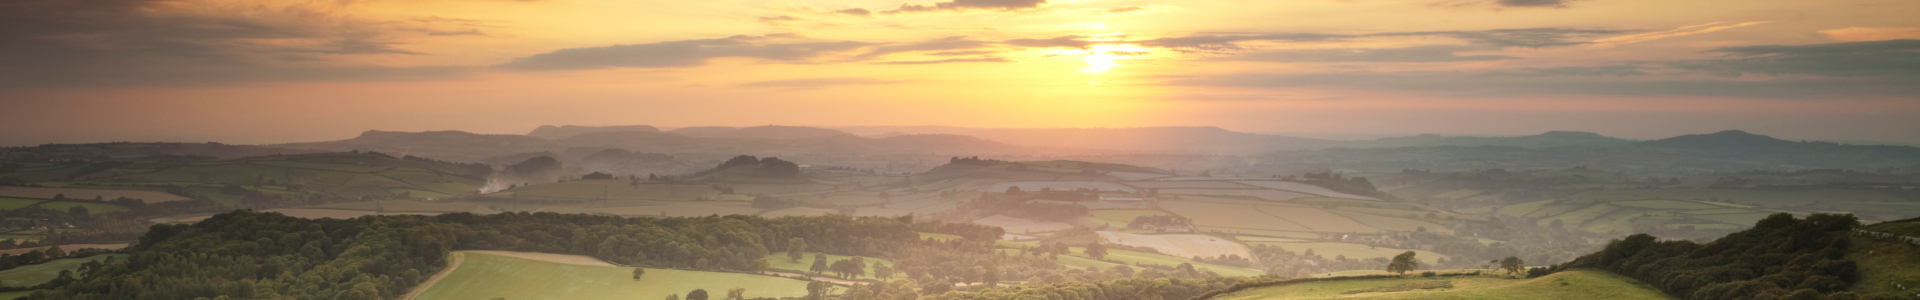 View west from Eggardon Hill in Dorset, at sunset